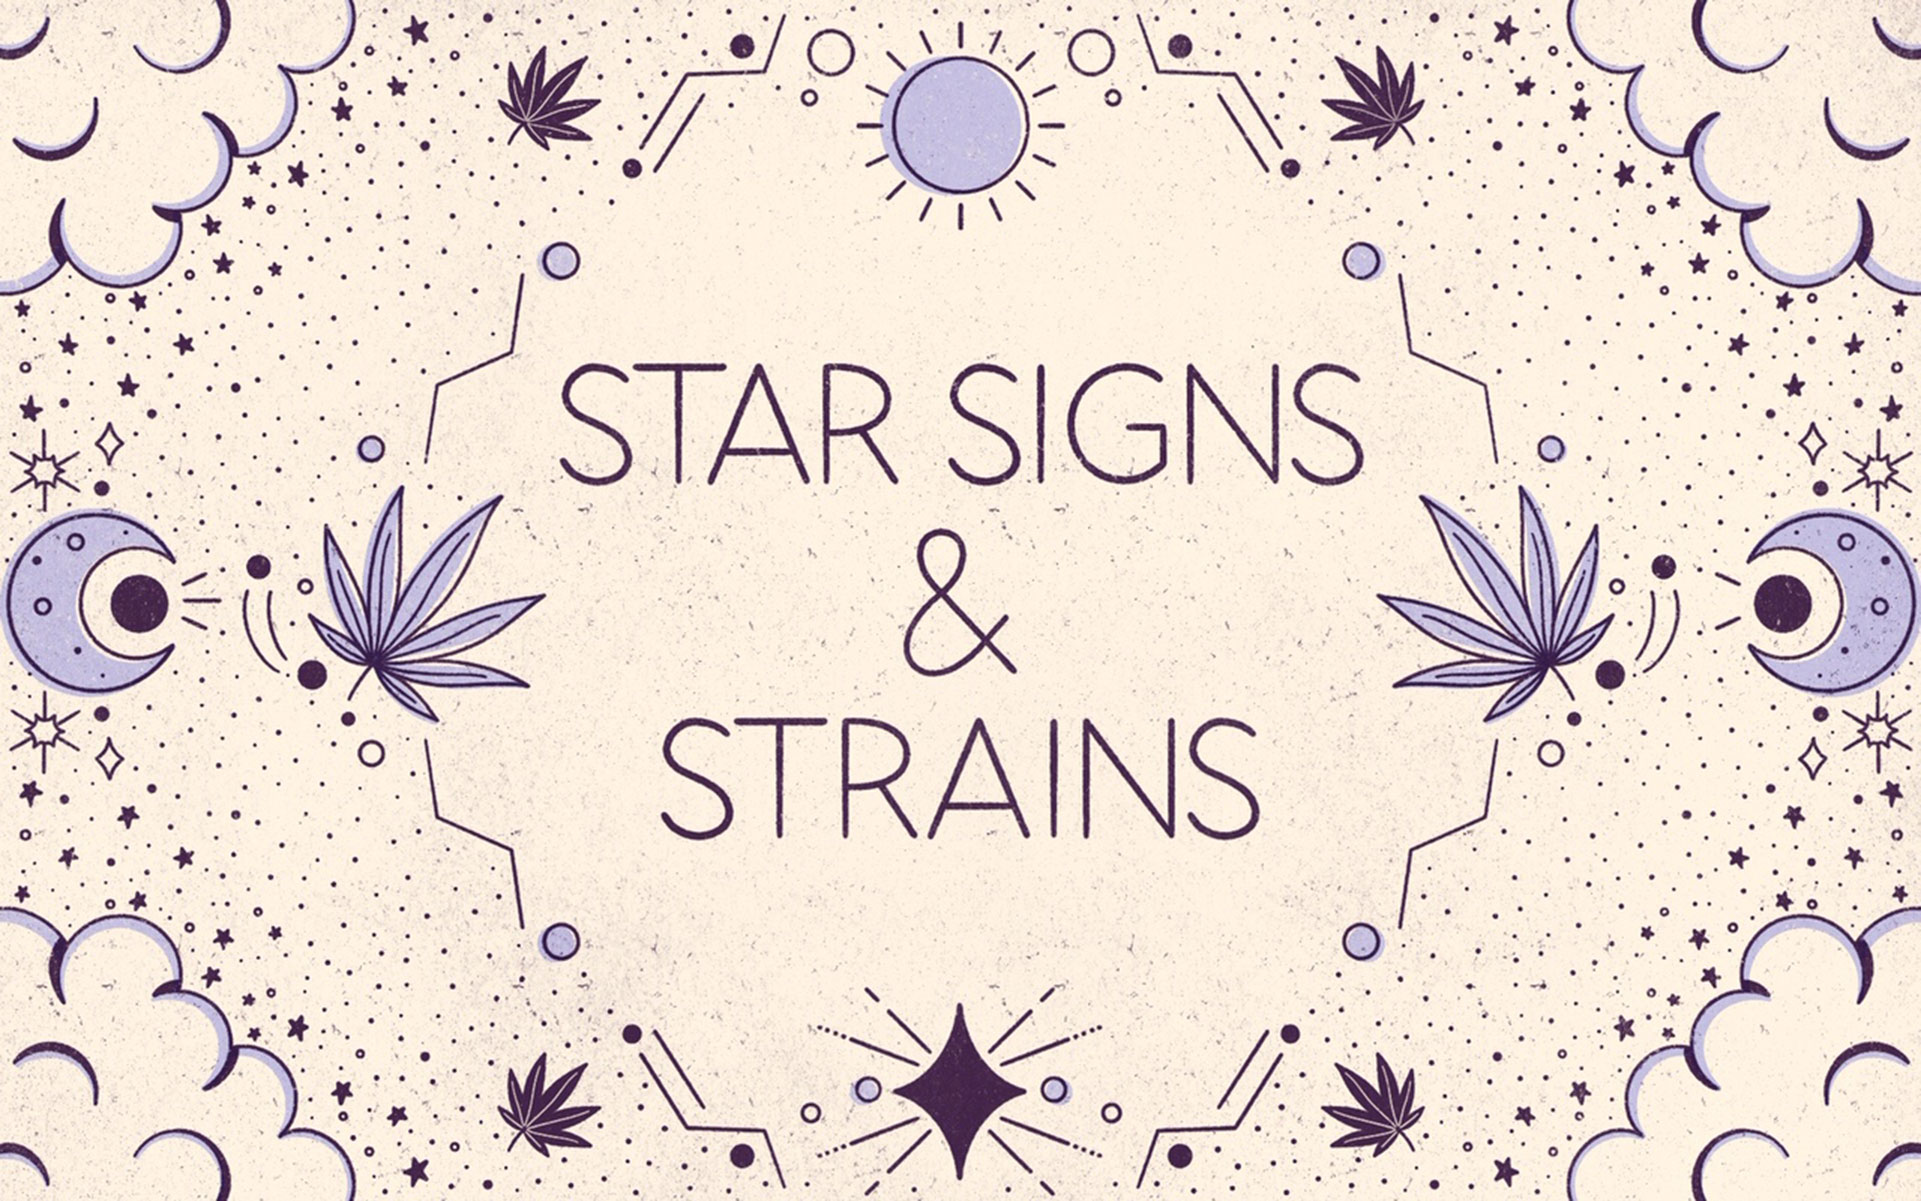 star-signs-and-cannabis-strains:-april-2021-horoscopes